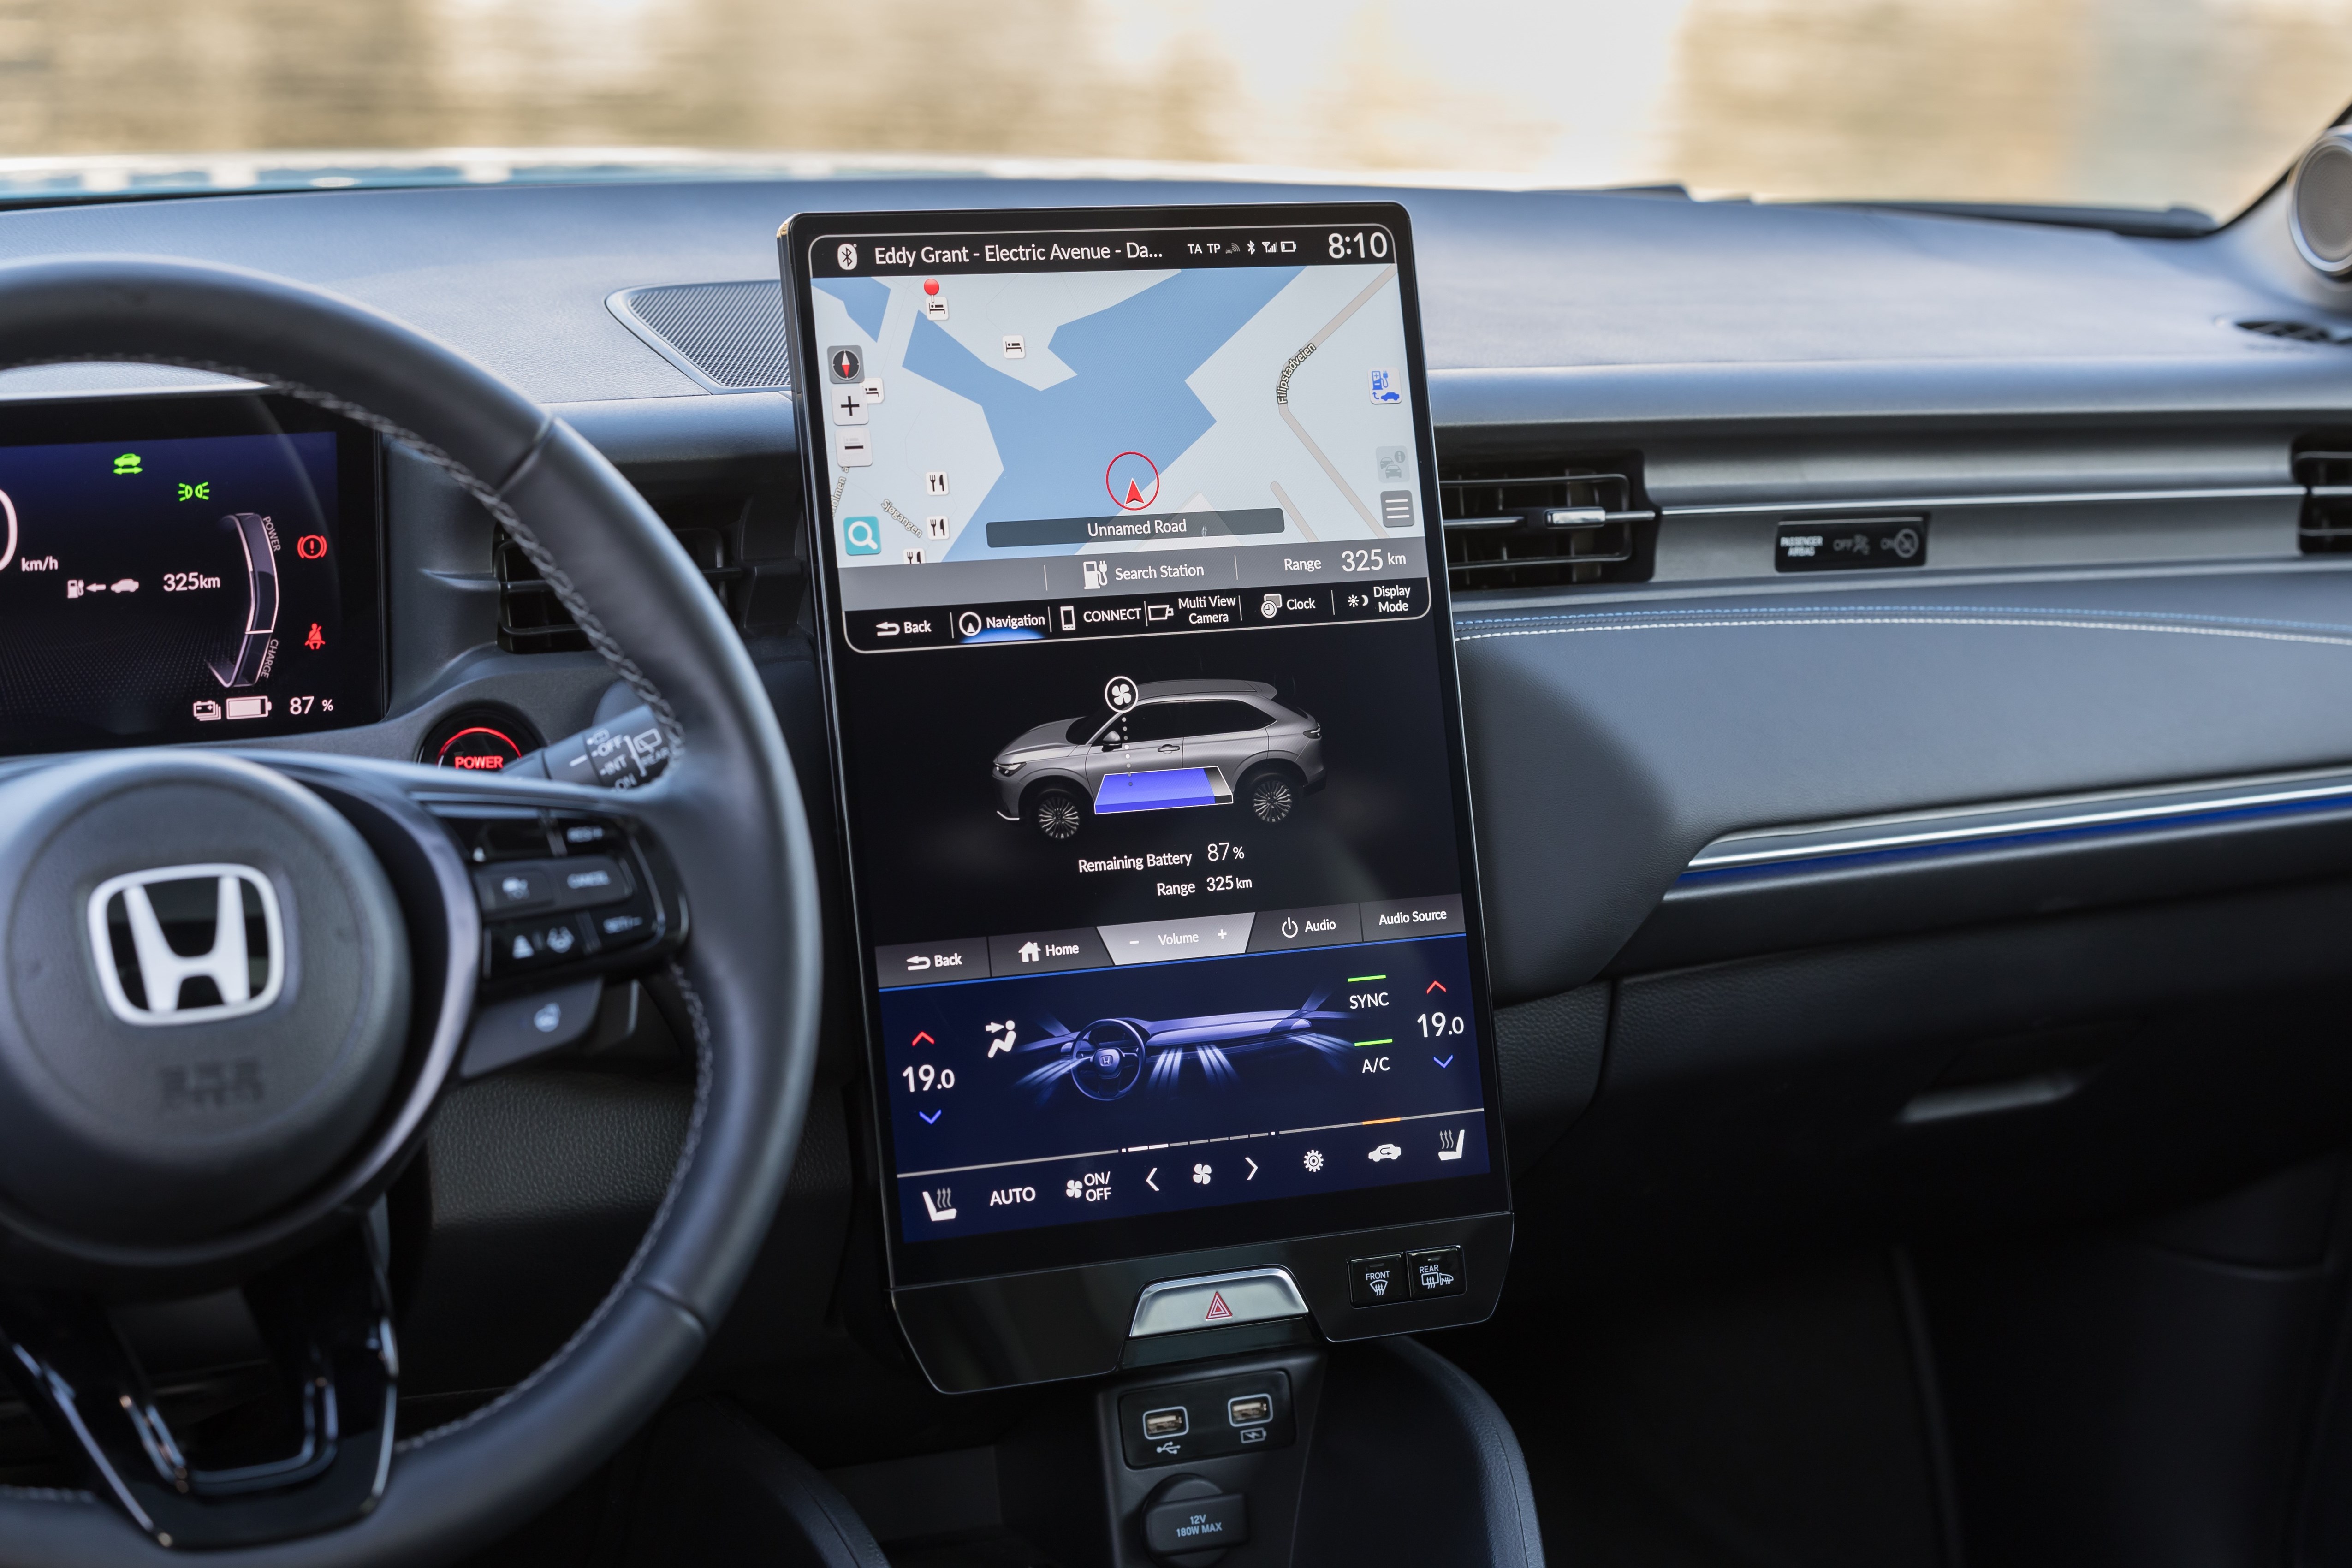 15.1" Touch Screen, with Bluetooth and Apple CarPlay Connection